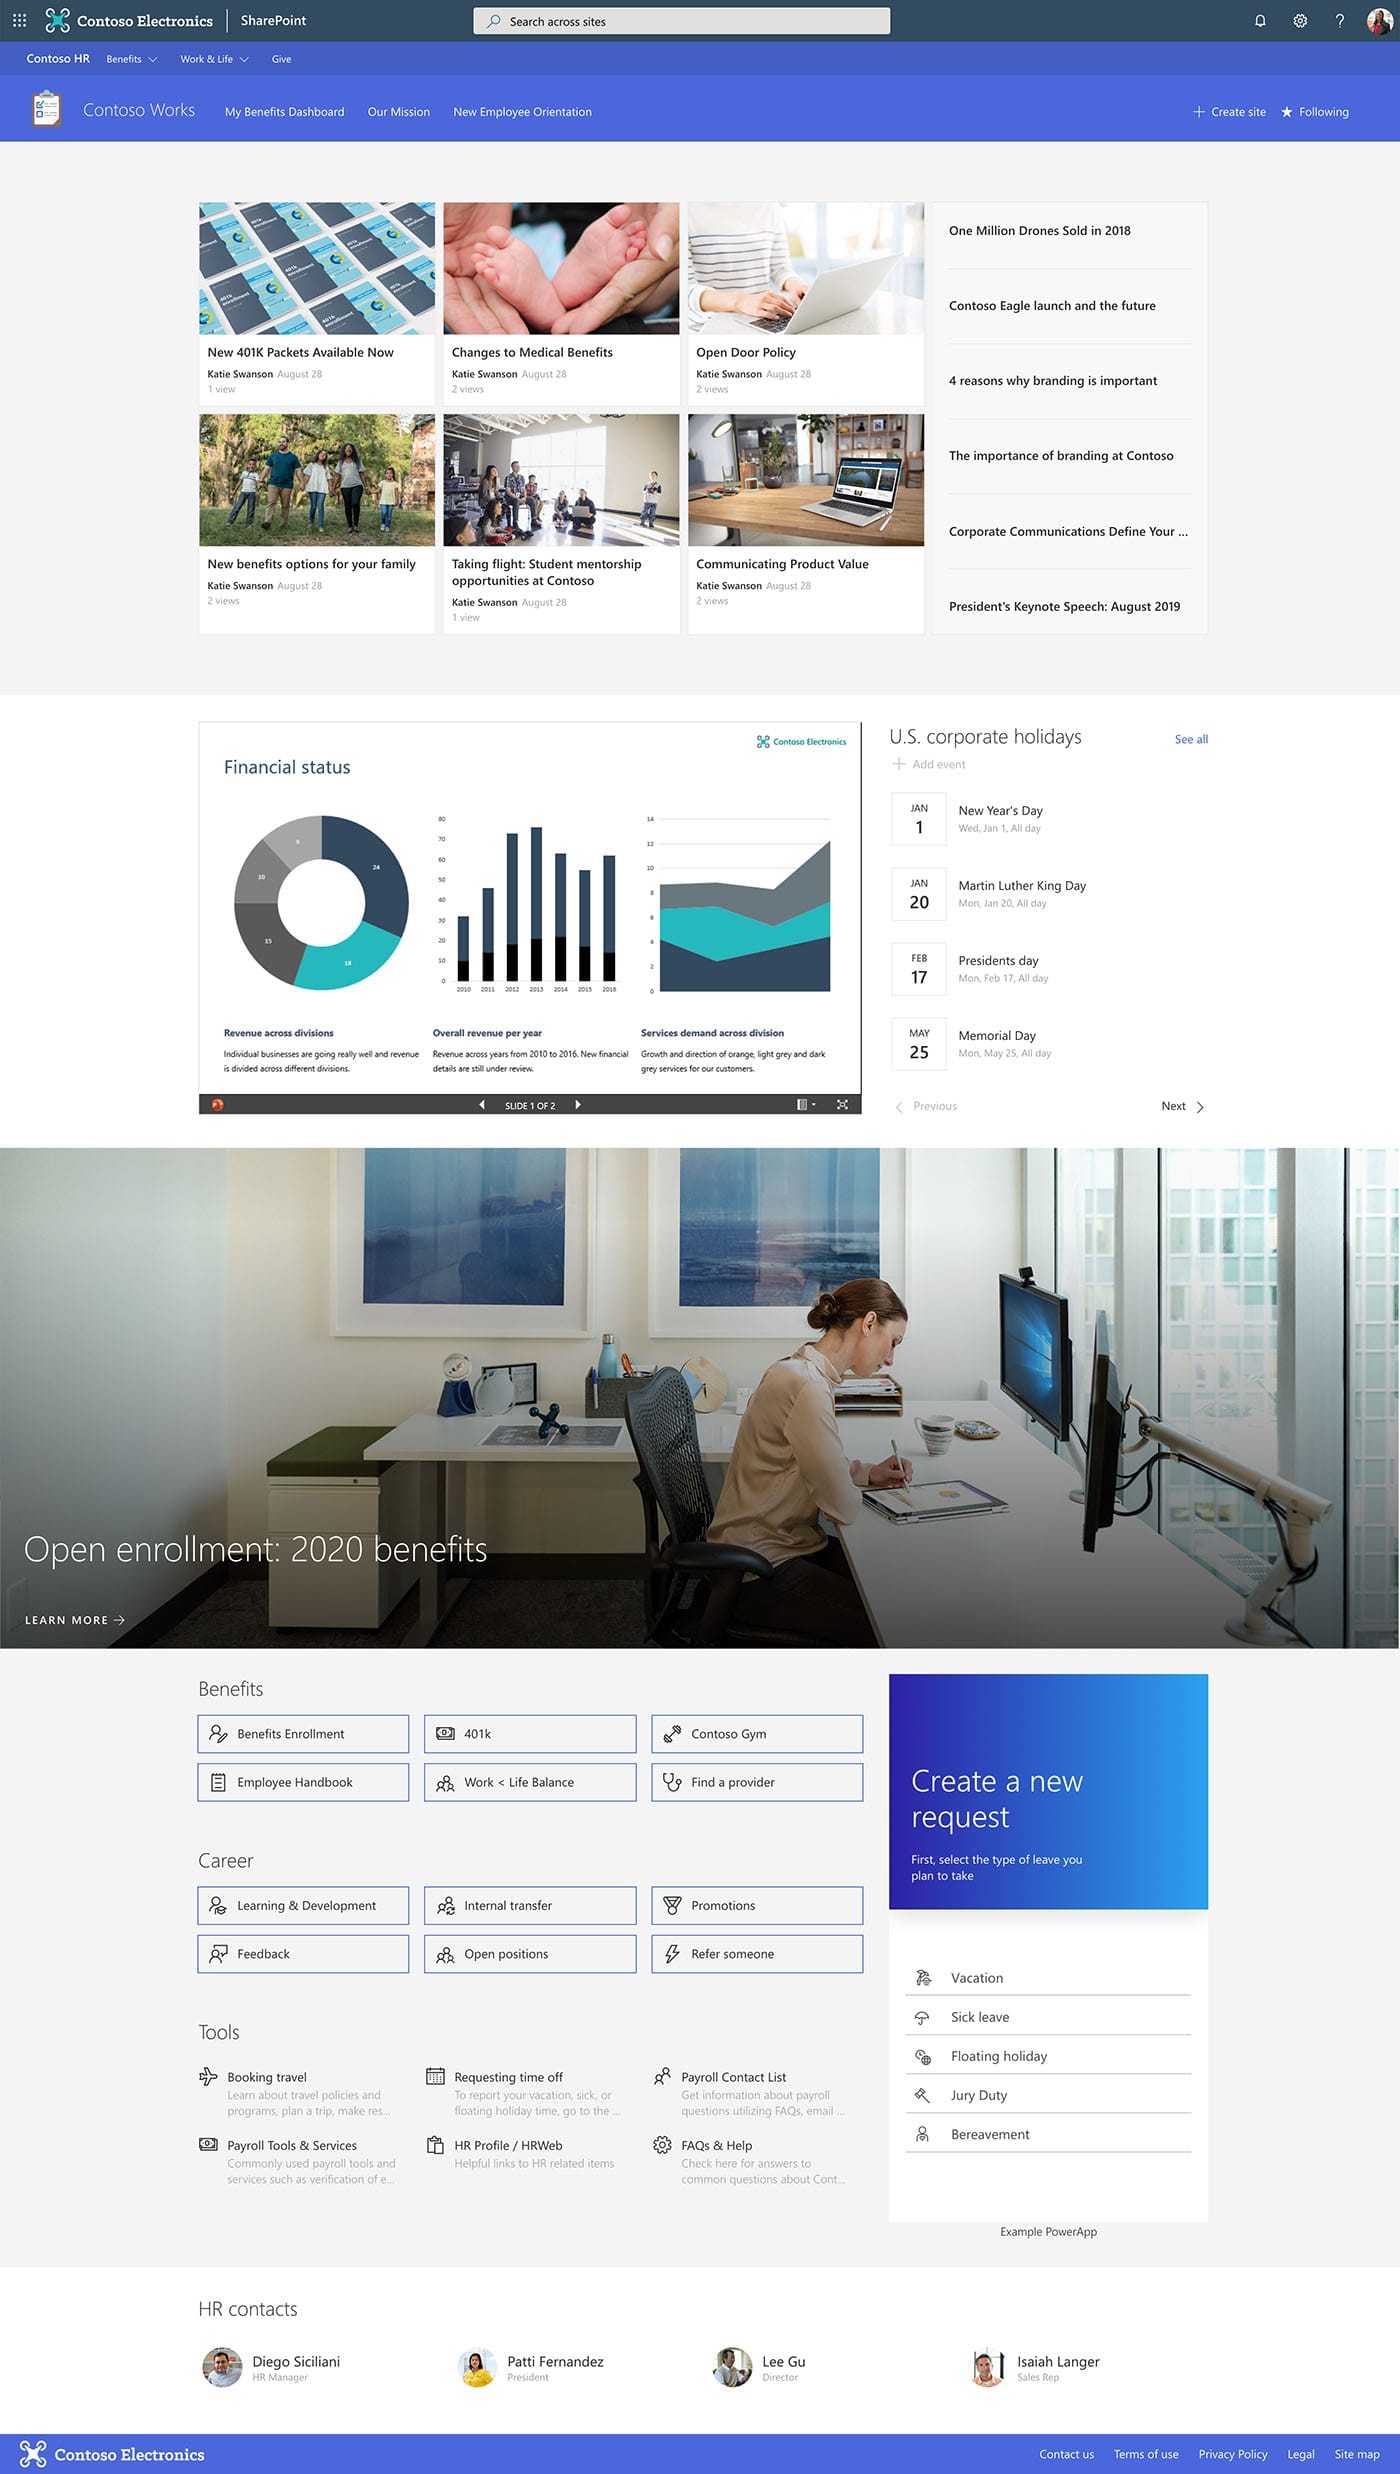 25 great examples of SharePoint Microsoft 365 atWork